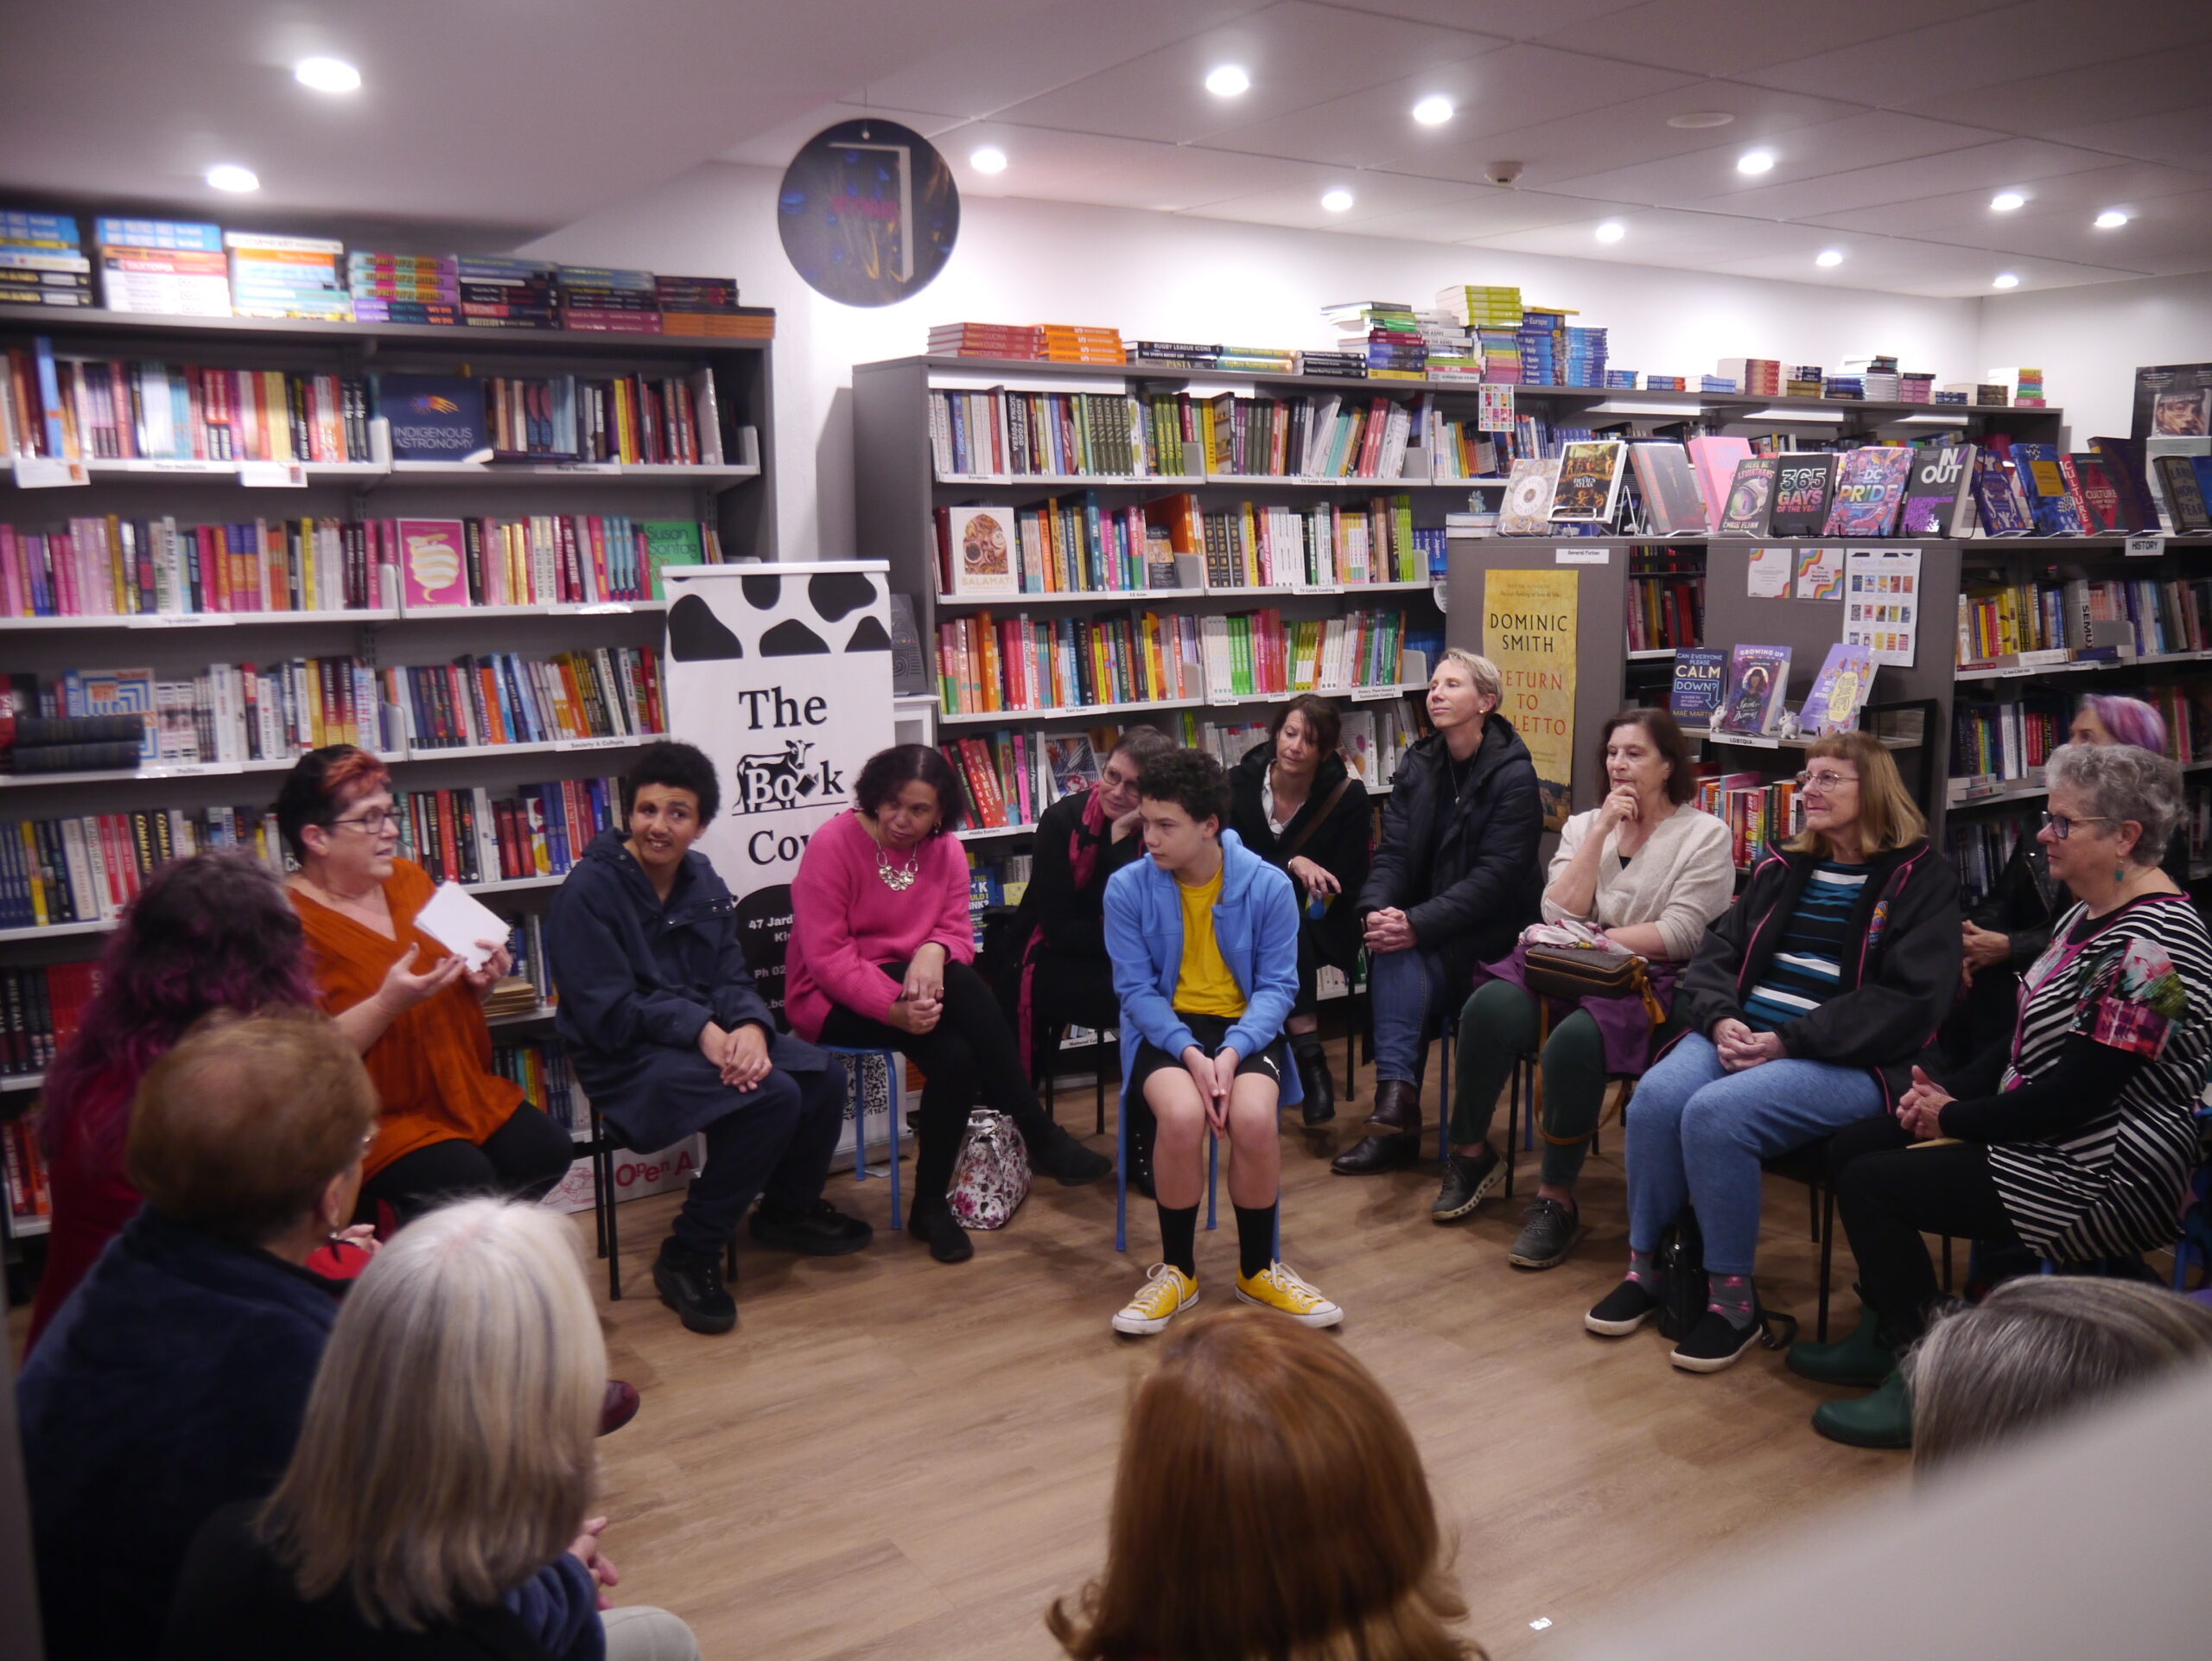 Kellie Nissen of Just Right Words is delivering a book launch for her book, 'What Cancer Said - And what I said back', at The Book Cow bookshop.